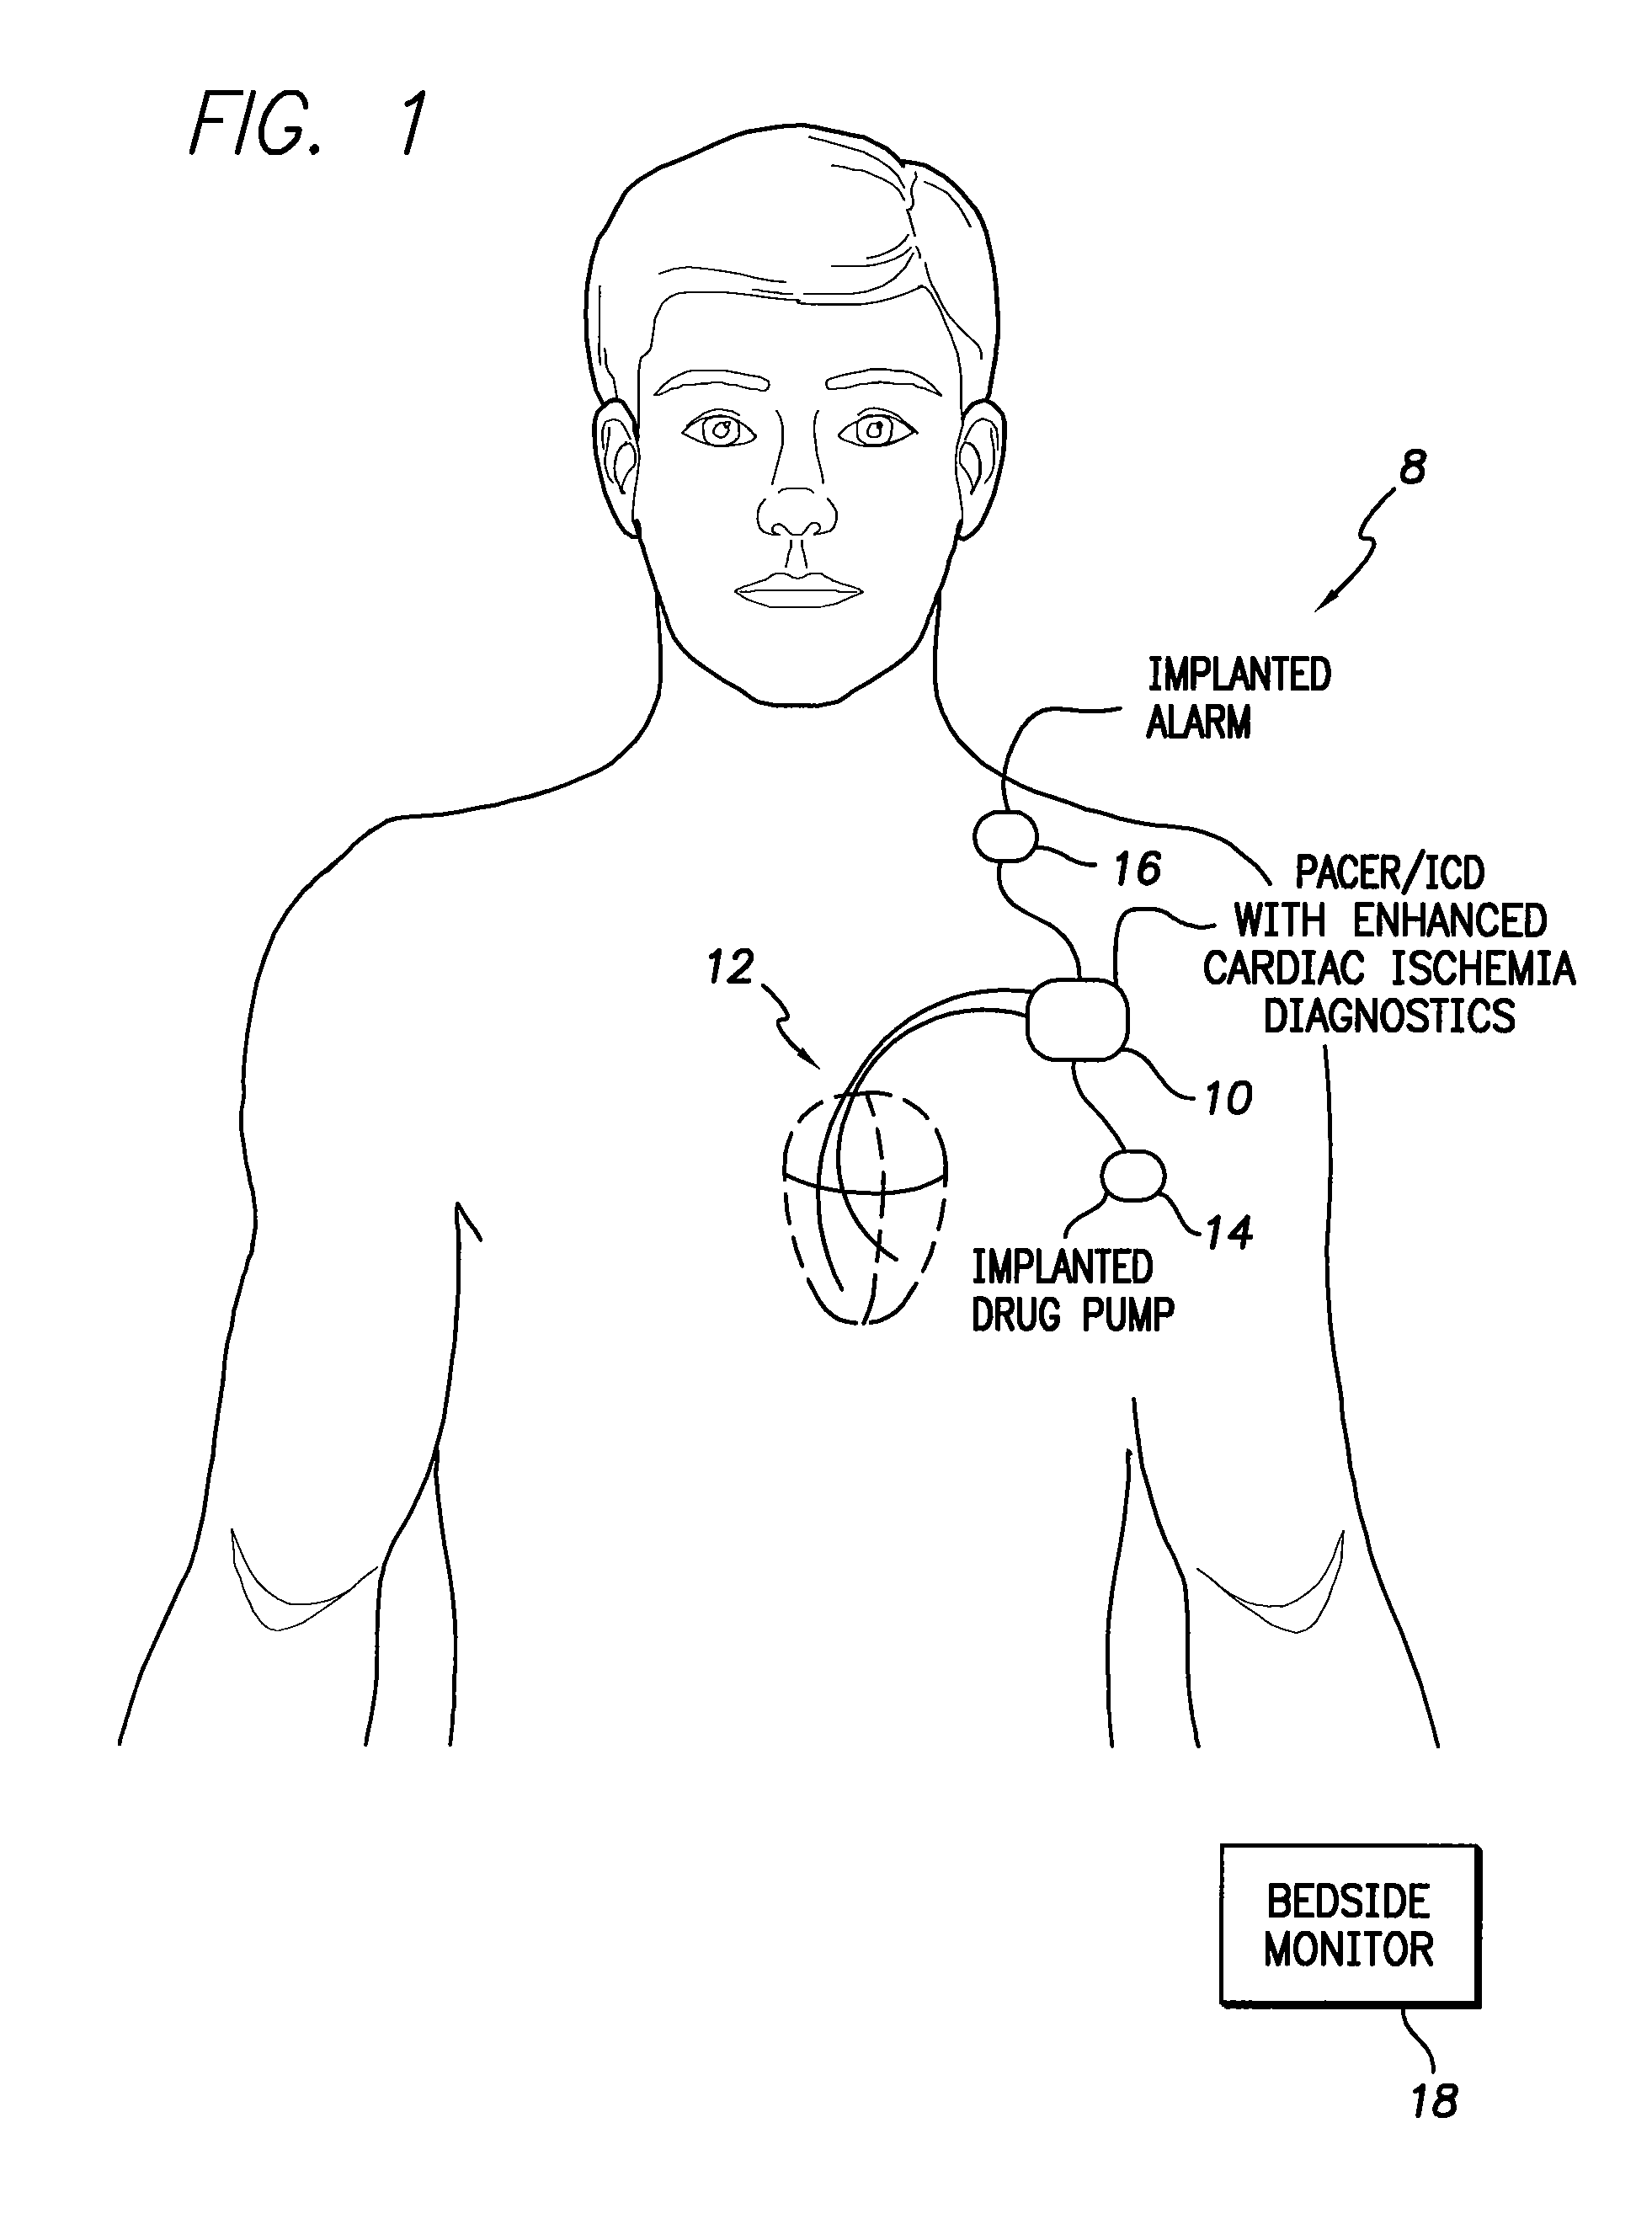 System and method for generating and using cardiac ischemia diagnostics based on arrhythmia precursors and arrhythmia episodes